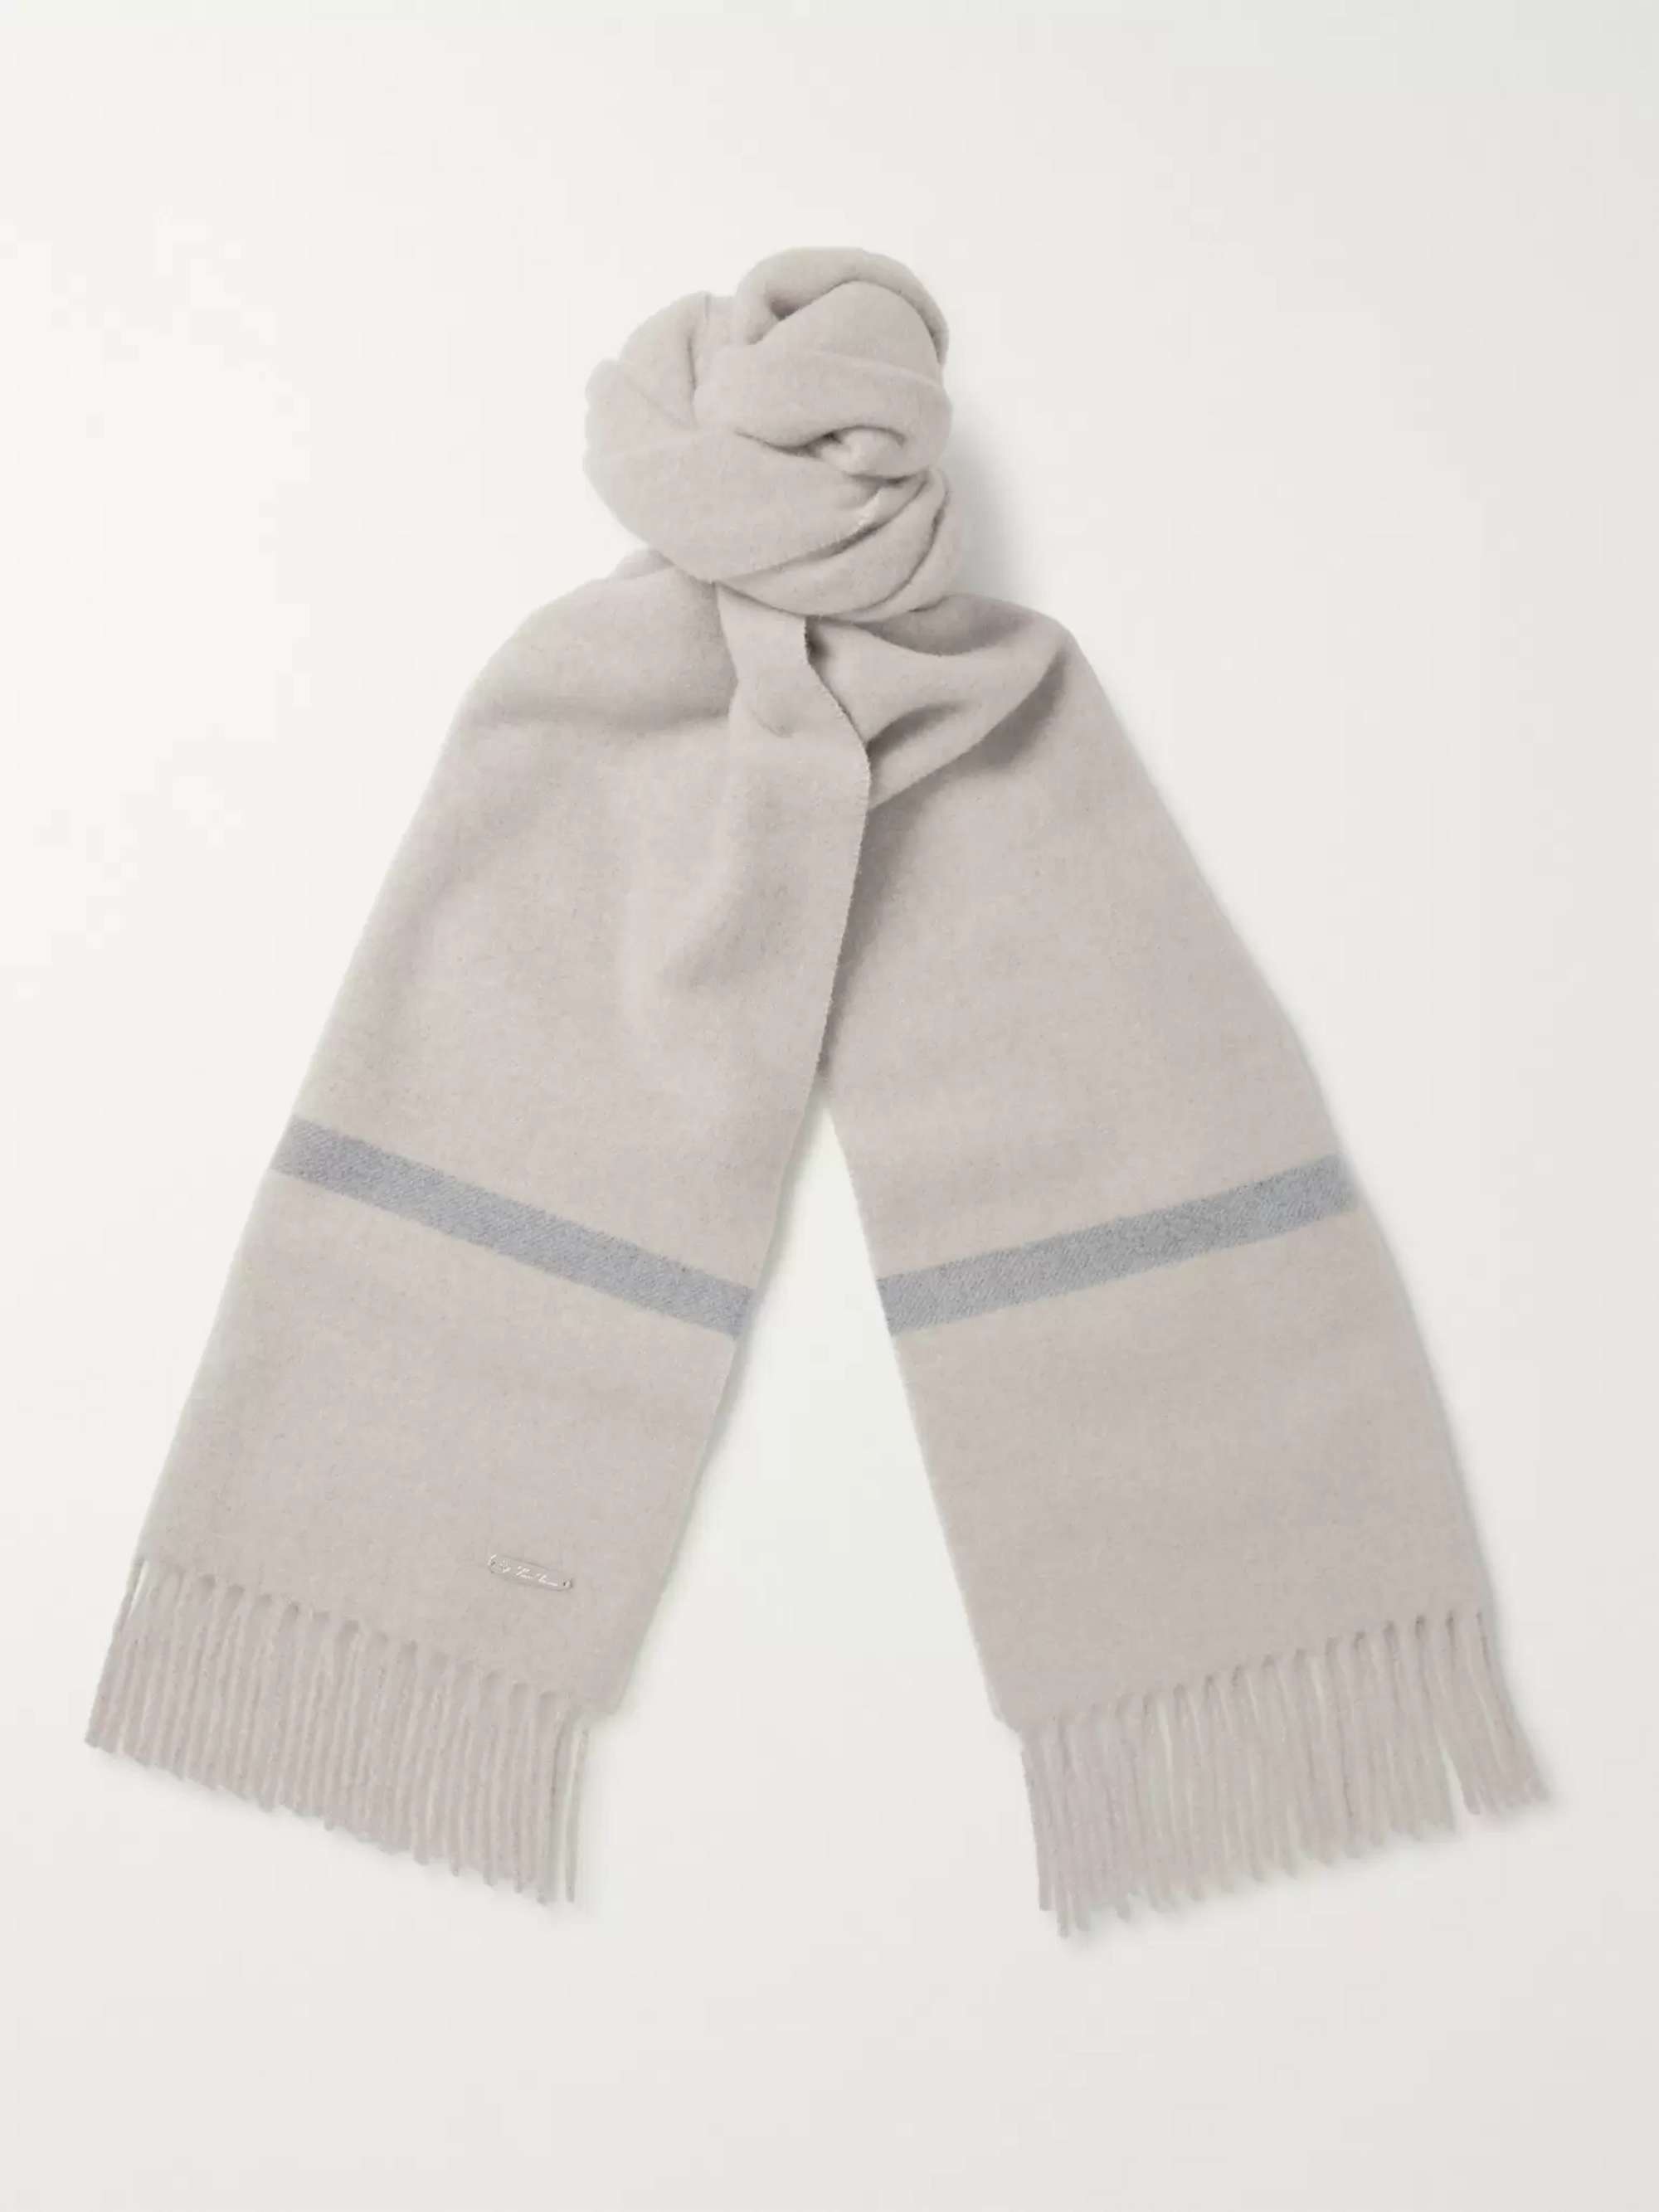 Brunello Cucinelli, Wool and Cashmere Diagonal Scarf with Striped Edge, Grey, One Size